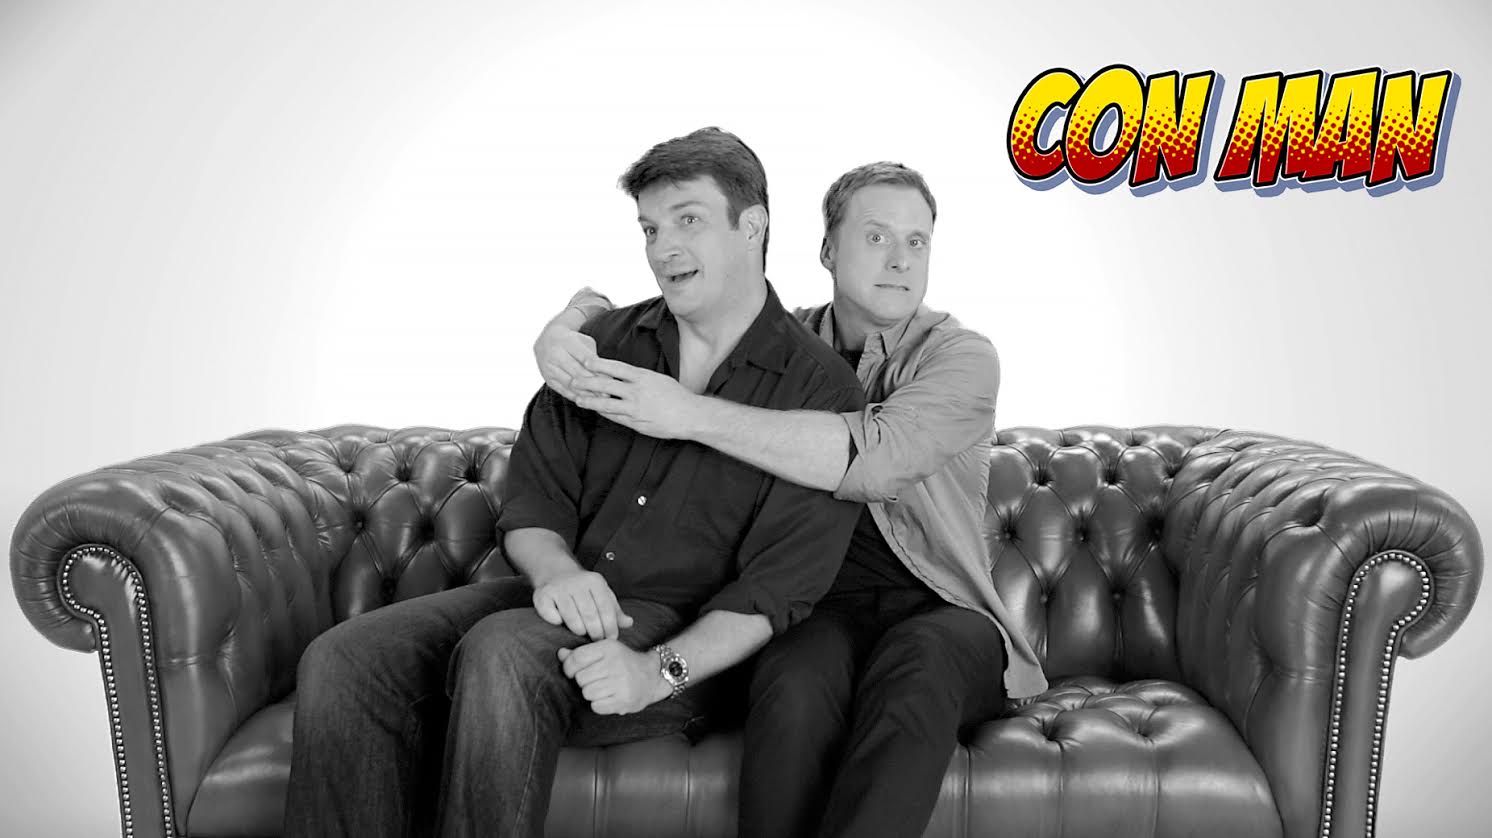 ALAN TUDYK [Exclusive Interview]: A Con Man Sits Down With The Traveling Nerd!